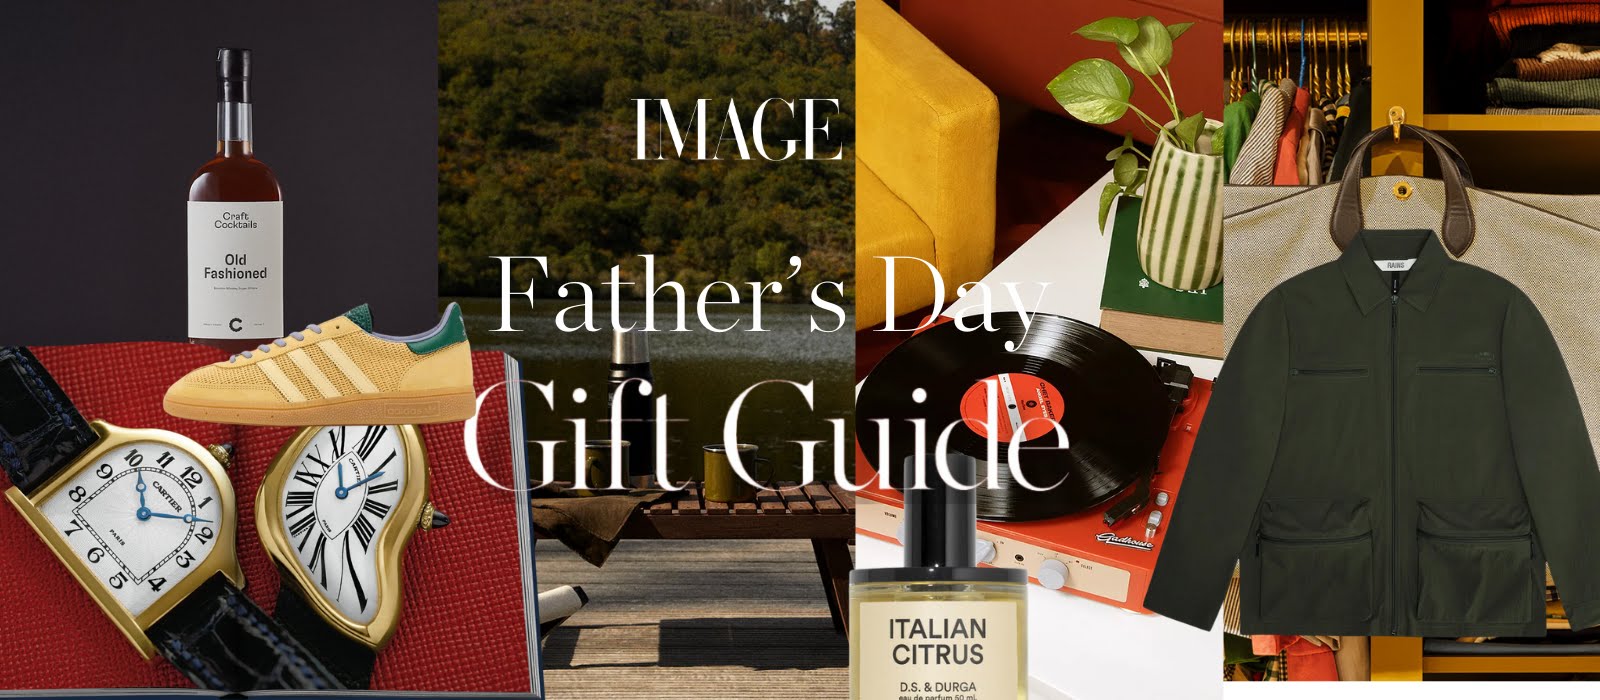 The IMAGE Father’s Day Gift Guide